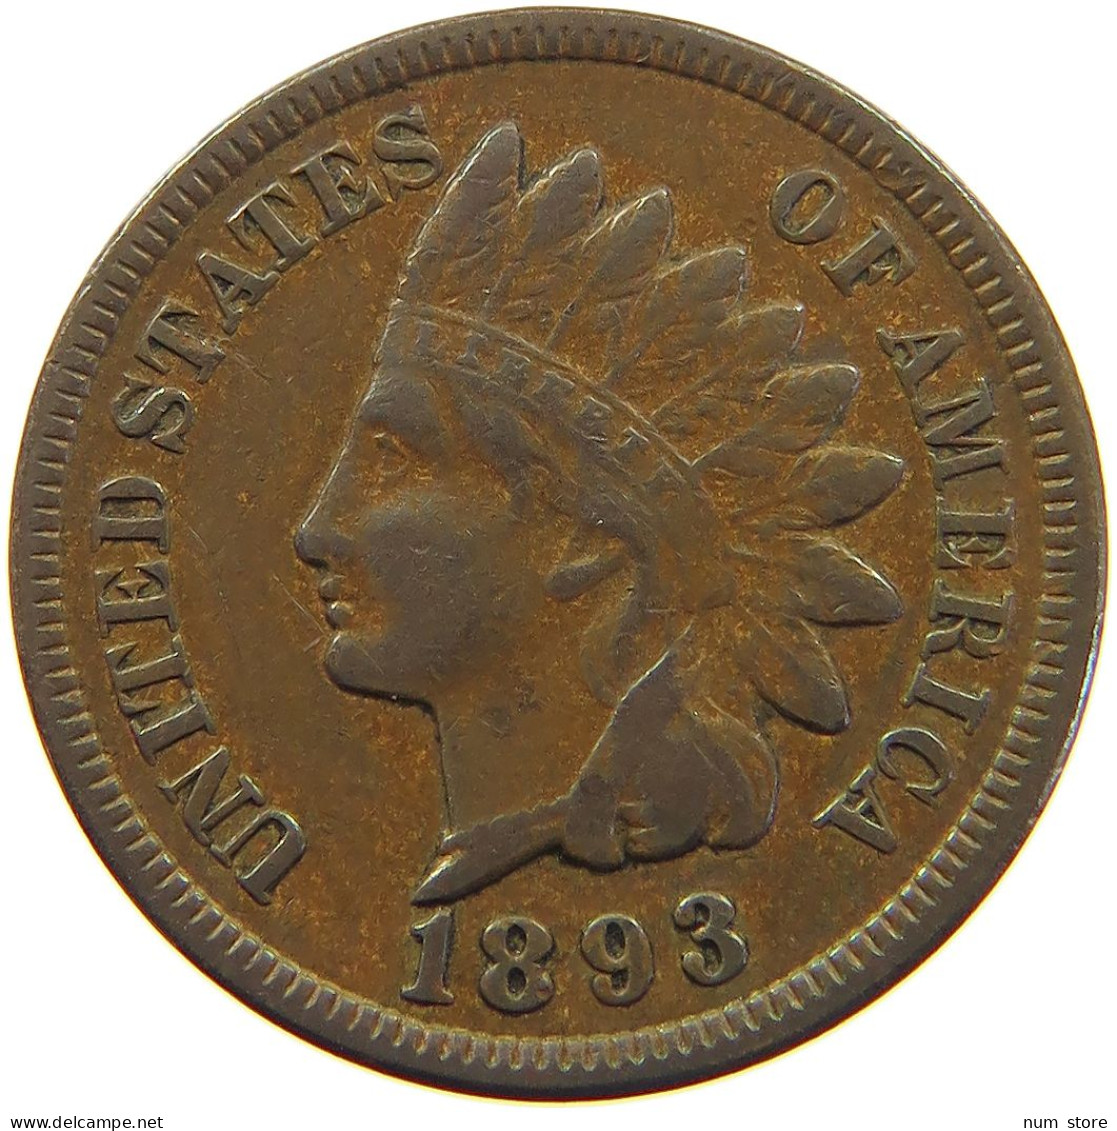 UNITED STATES OF AMERICA CENT 1893 INDIAN HEAD #c081 0455 - 1859-1909: Indian Head